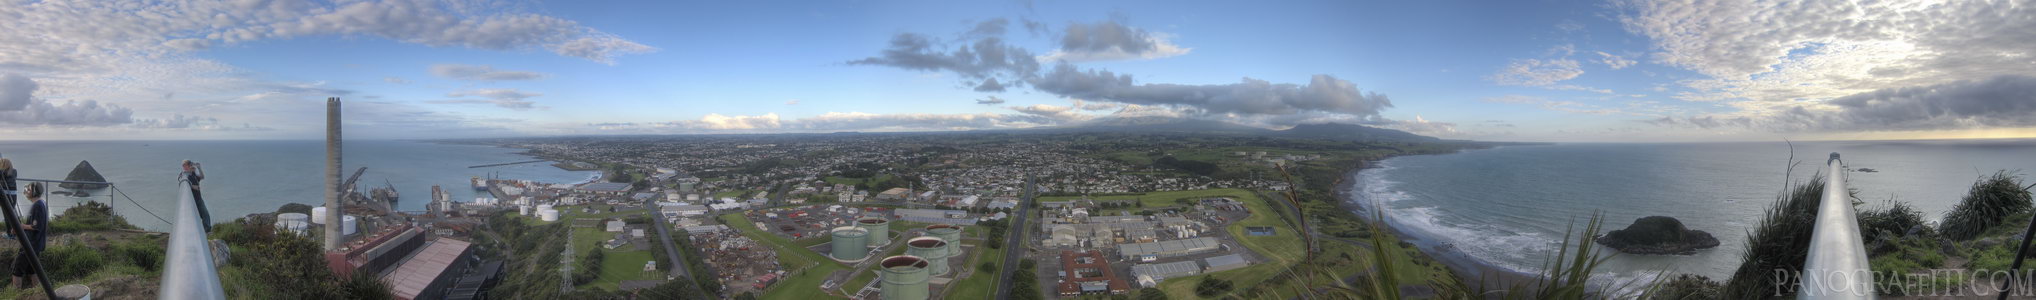 South View from Paritutu Rock in HDR - Paritutu Rock is in the Eastend Reserve and offers a 360 degree view of New Plymouth